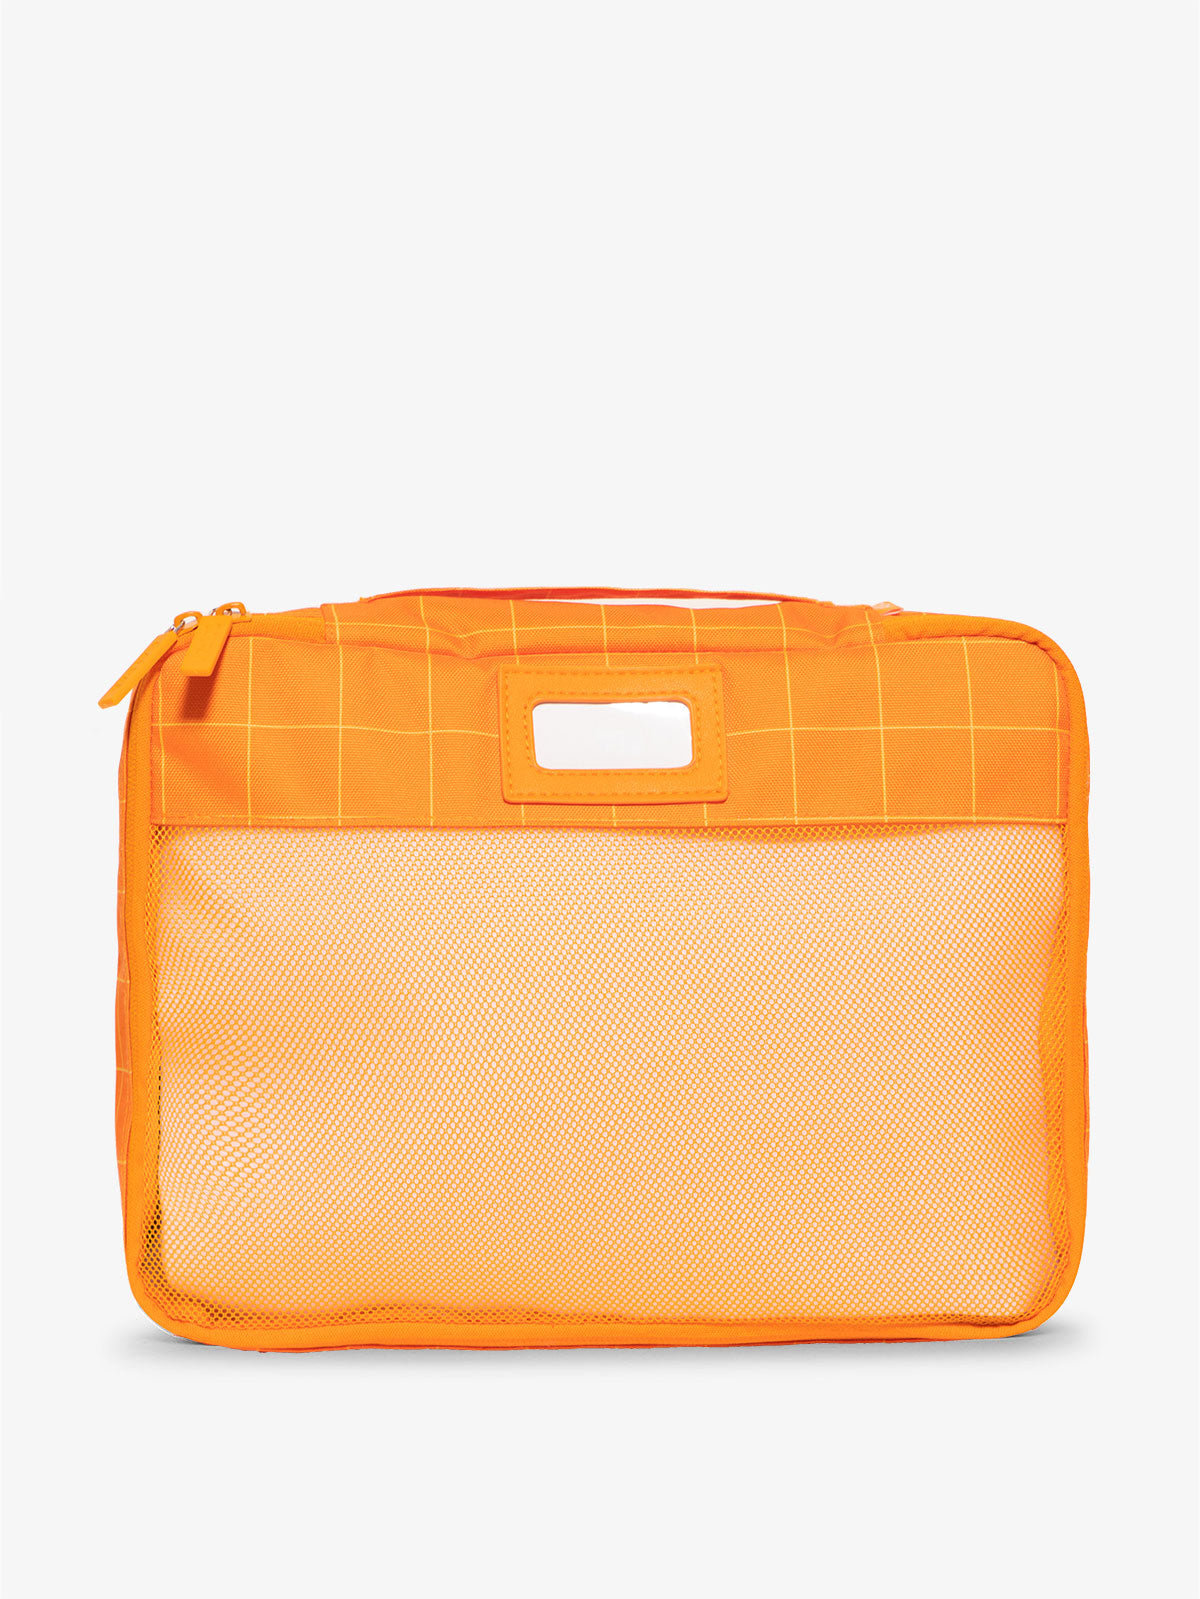 CALPAK luggage packing cubes for clothes with mesh front and label in orange grid